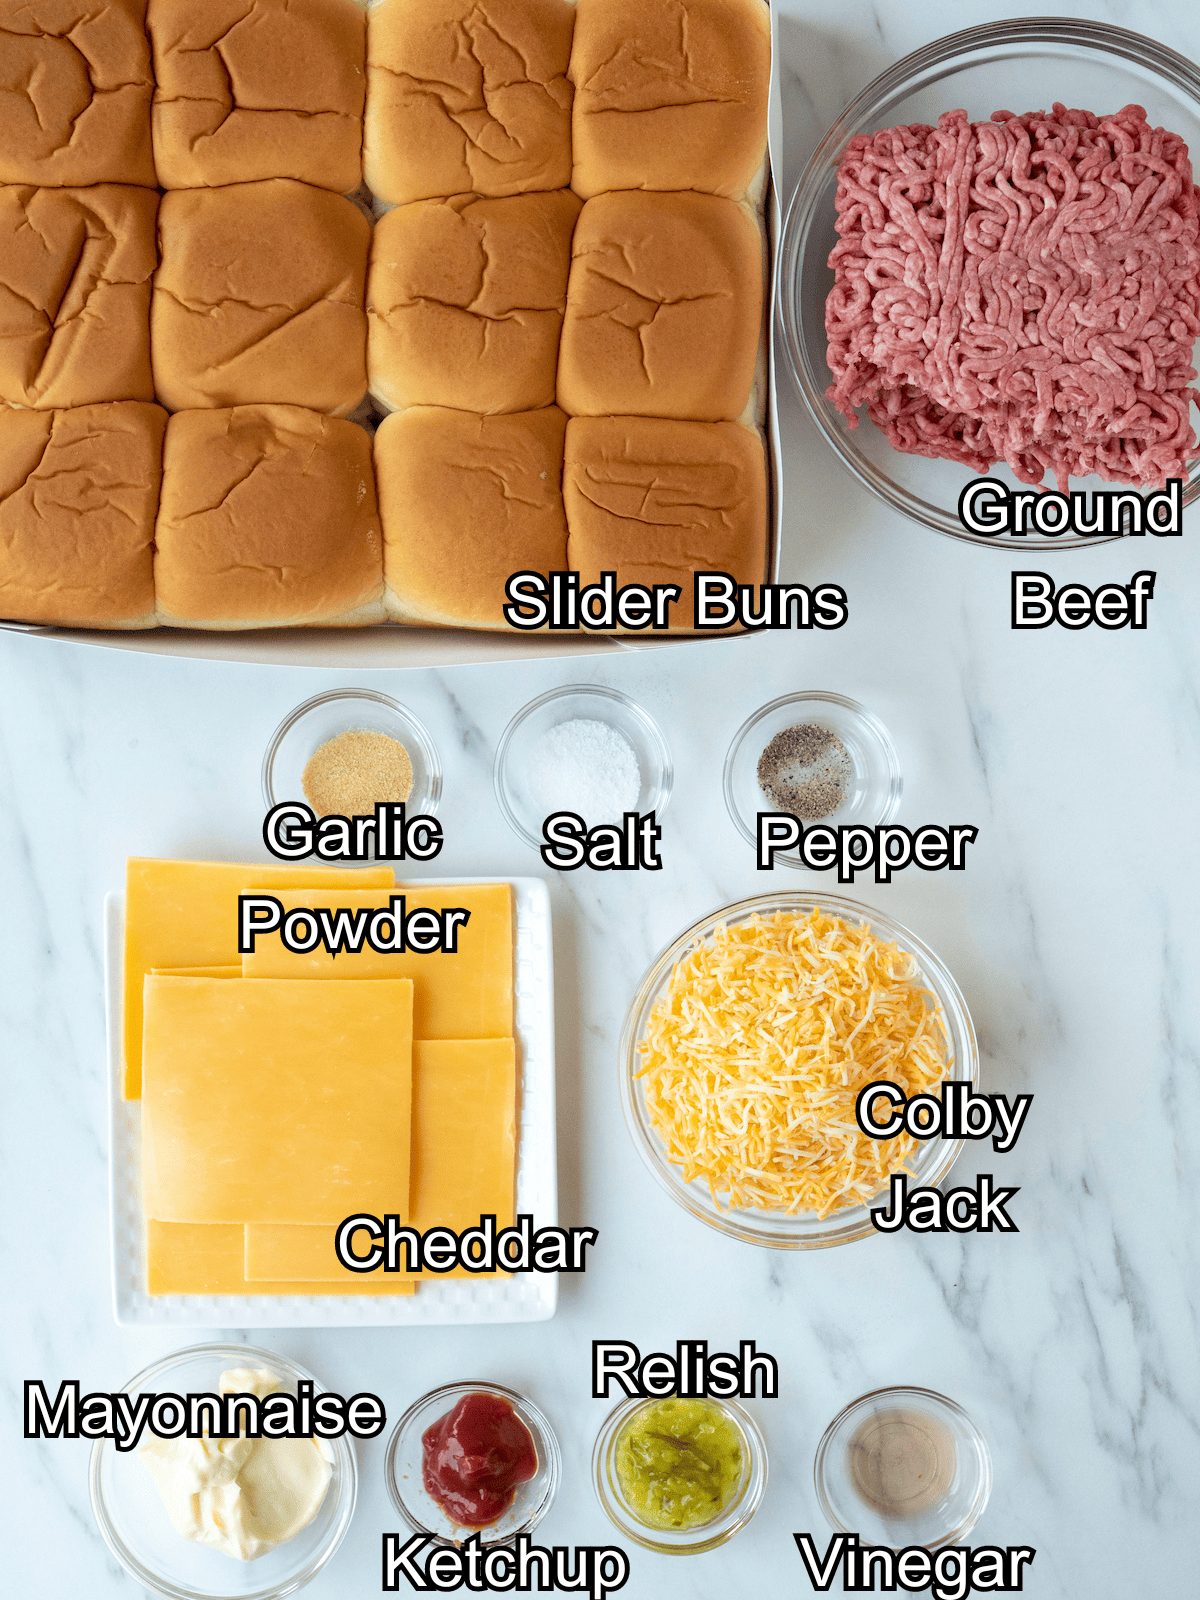 mise-en-place with all the ingredients required to make cheeseburger sliders.